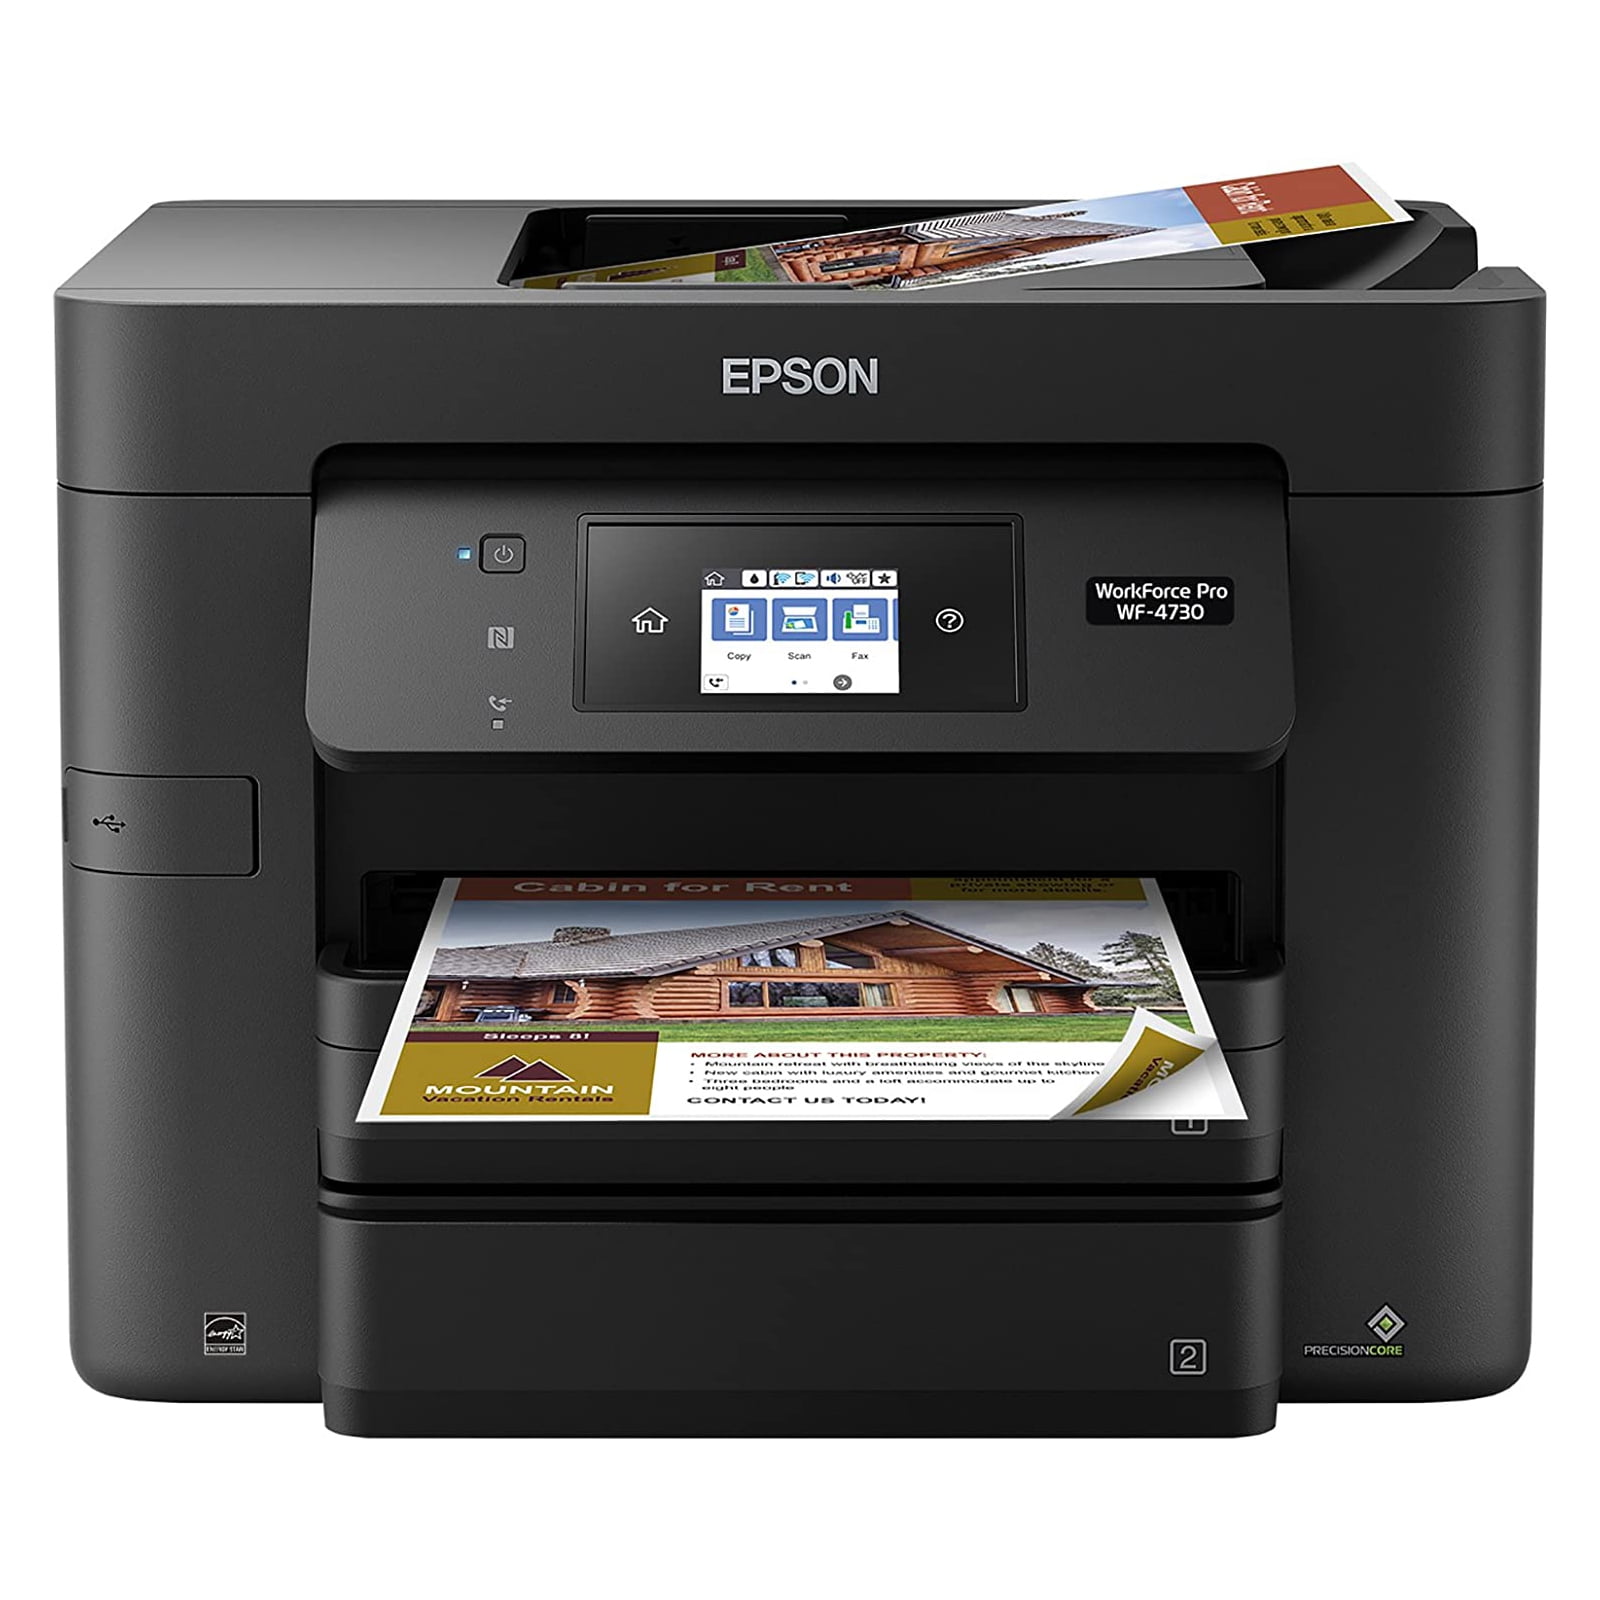 Epson WorkForce Pro WF-4730 Wireless All-in-One Color ...